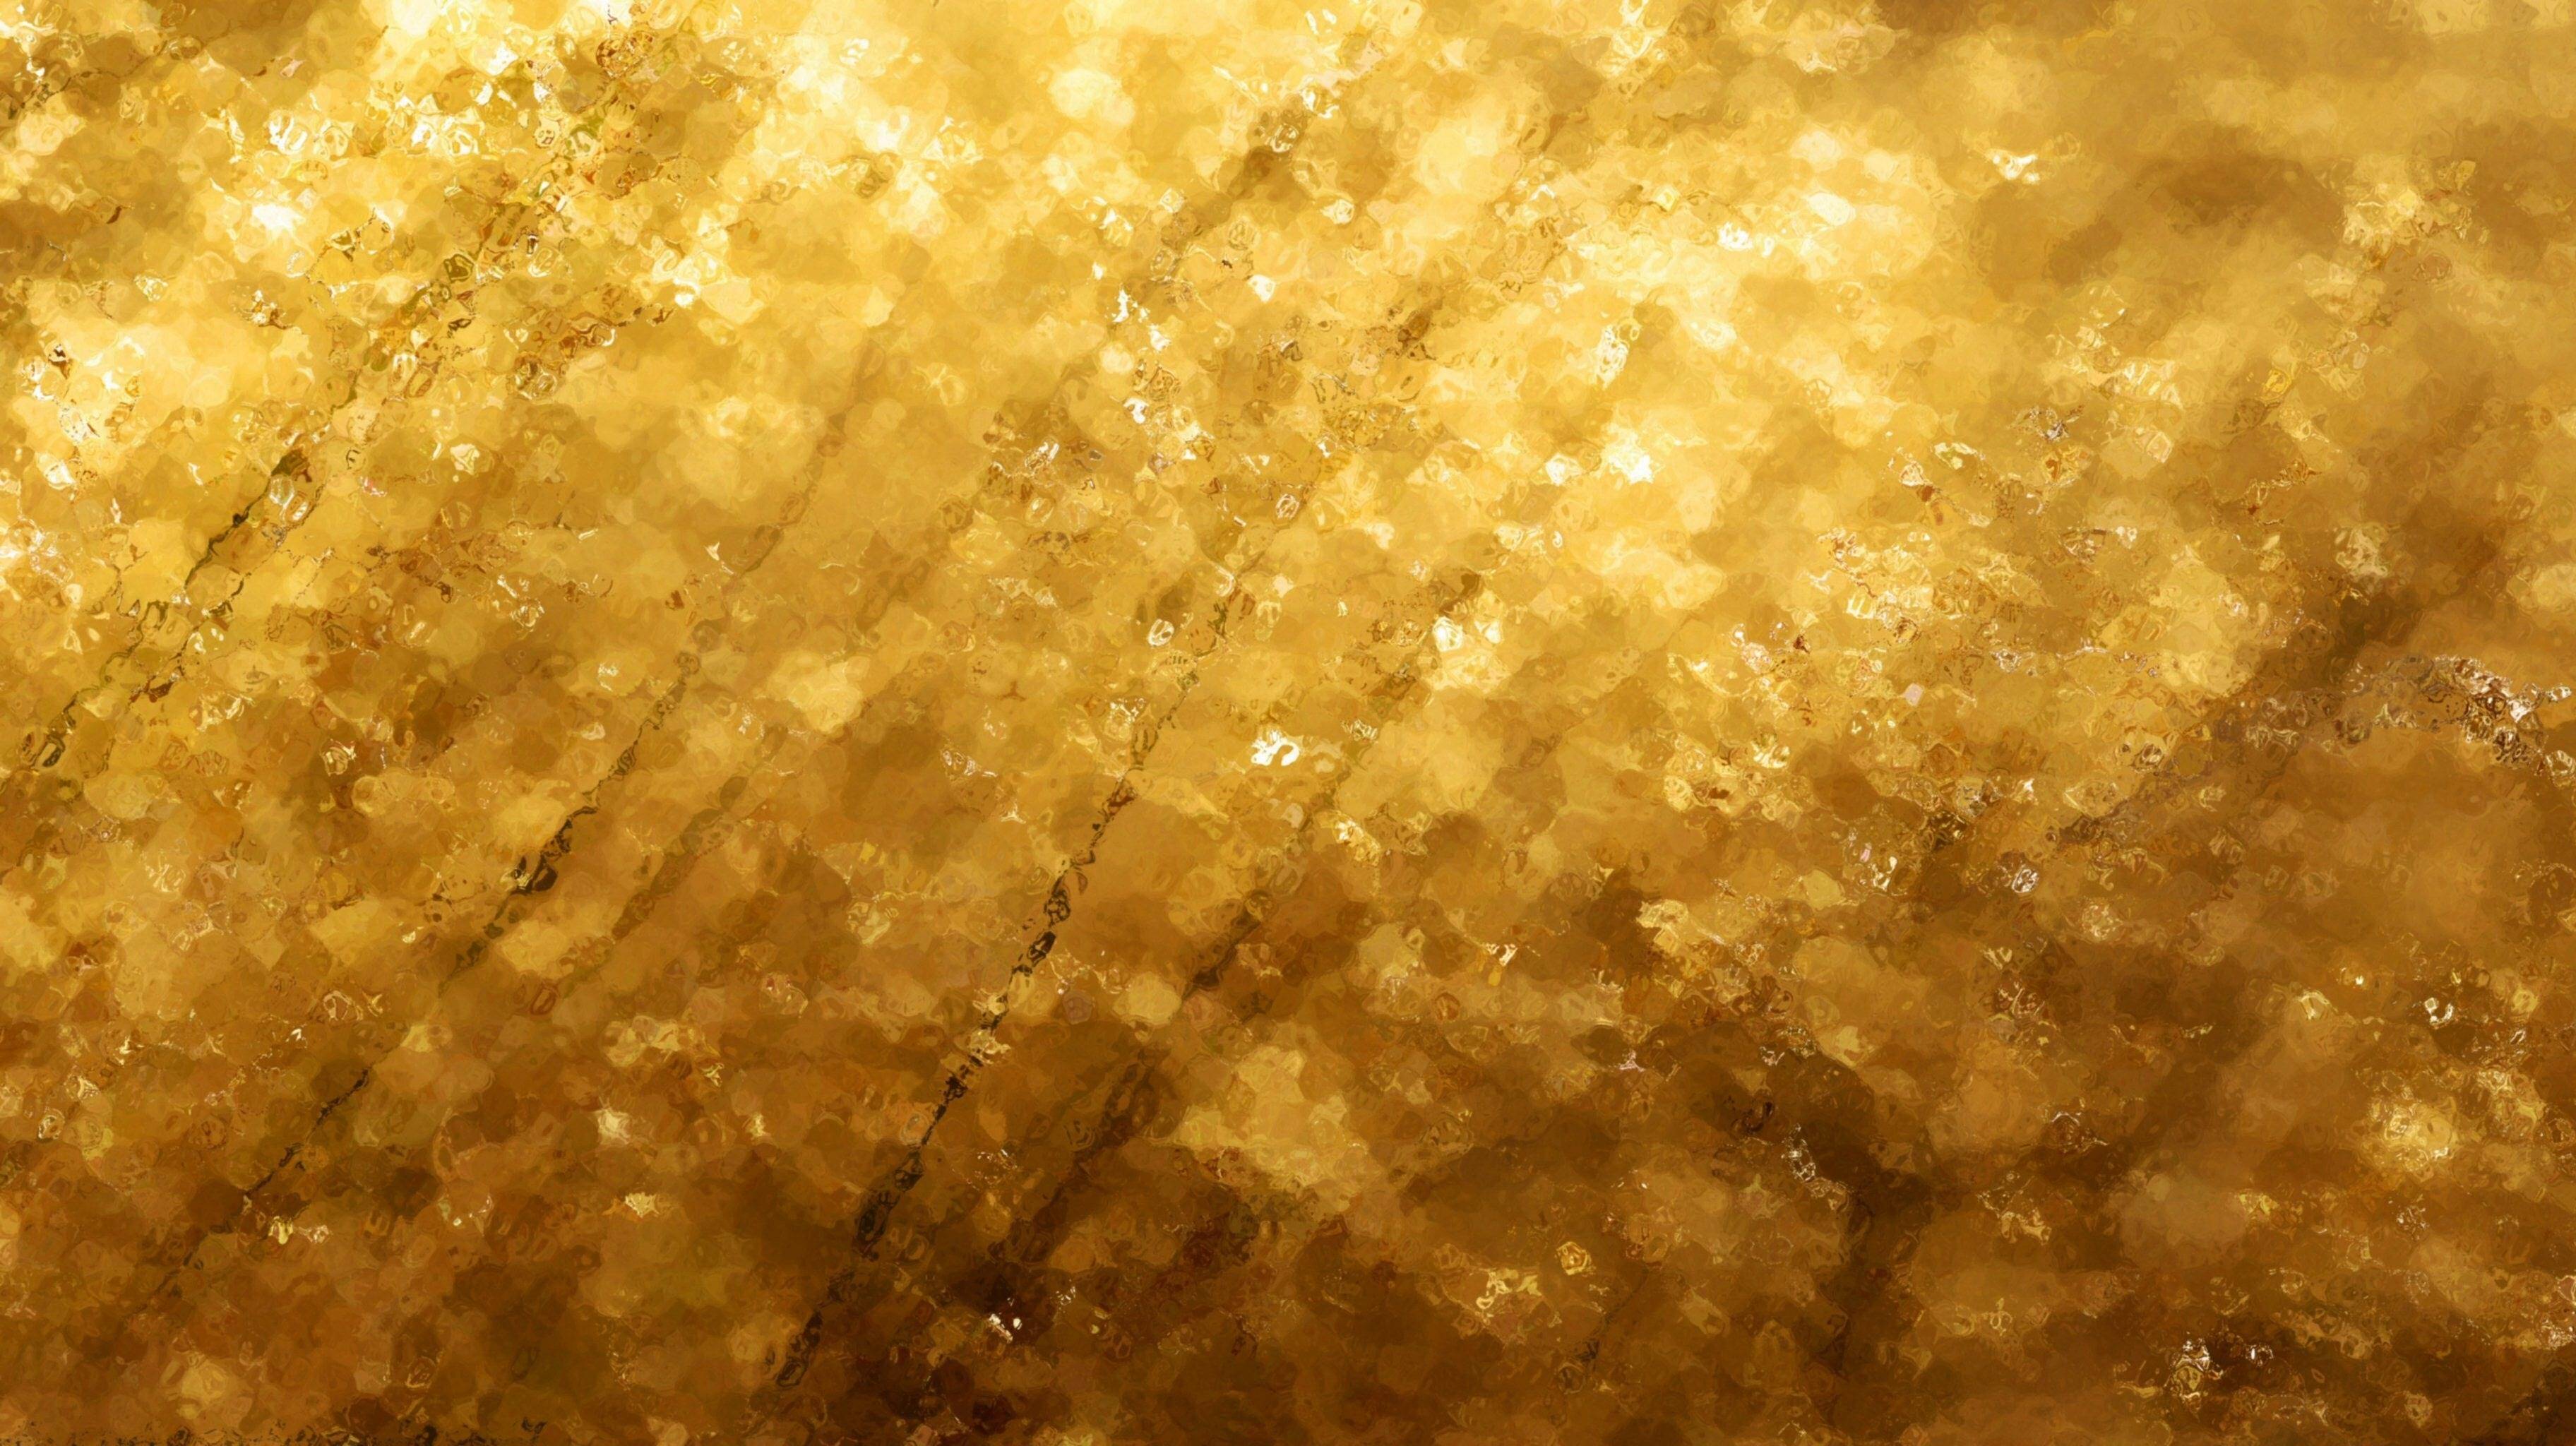 blurred gold hd background images wallpaper 